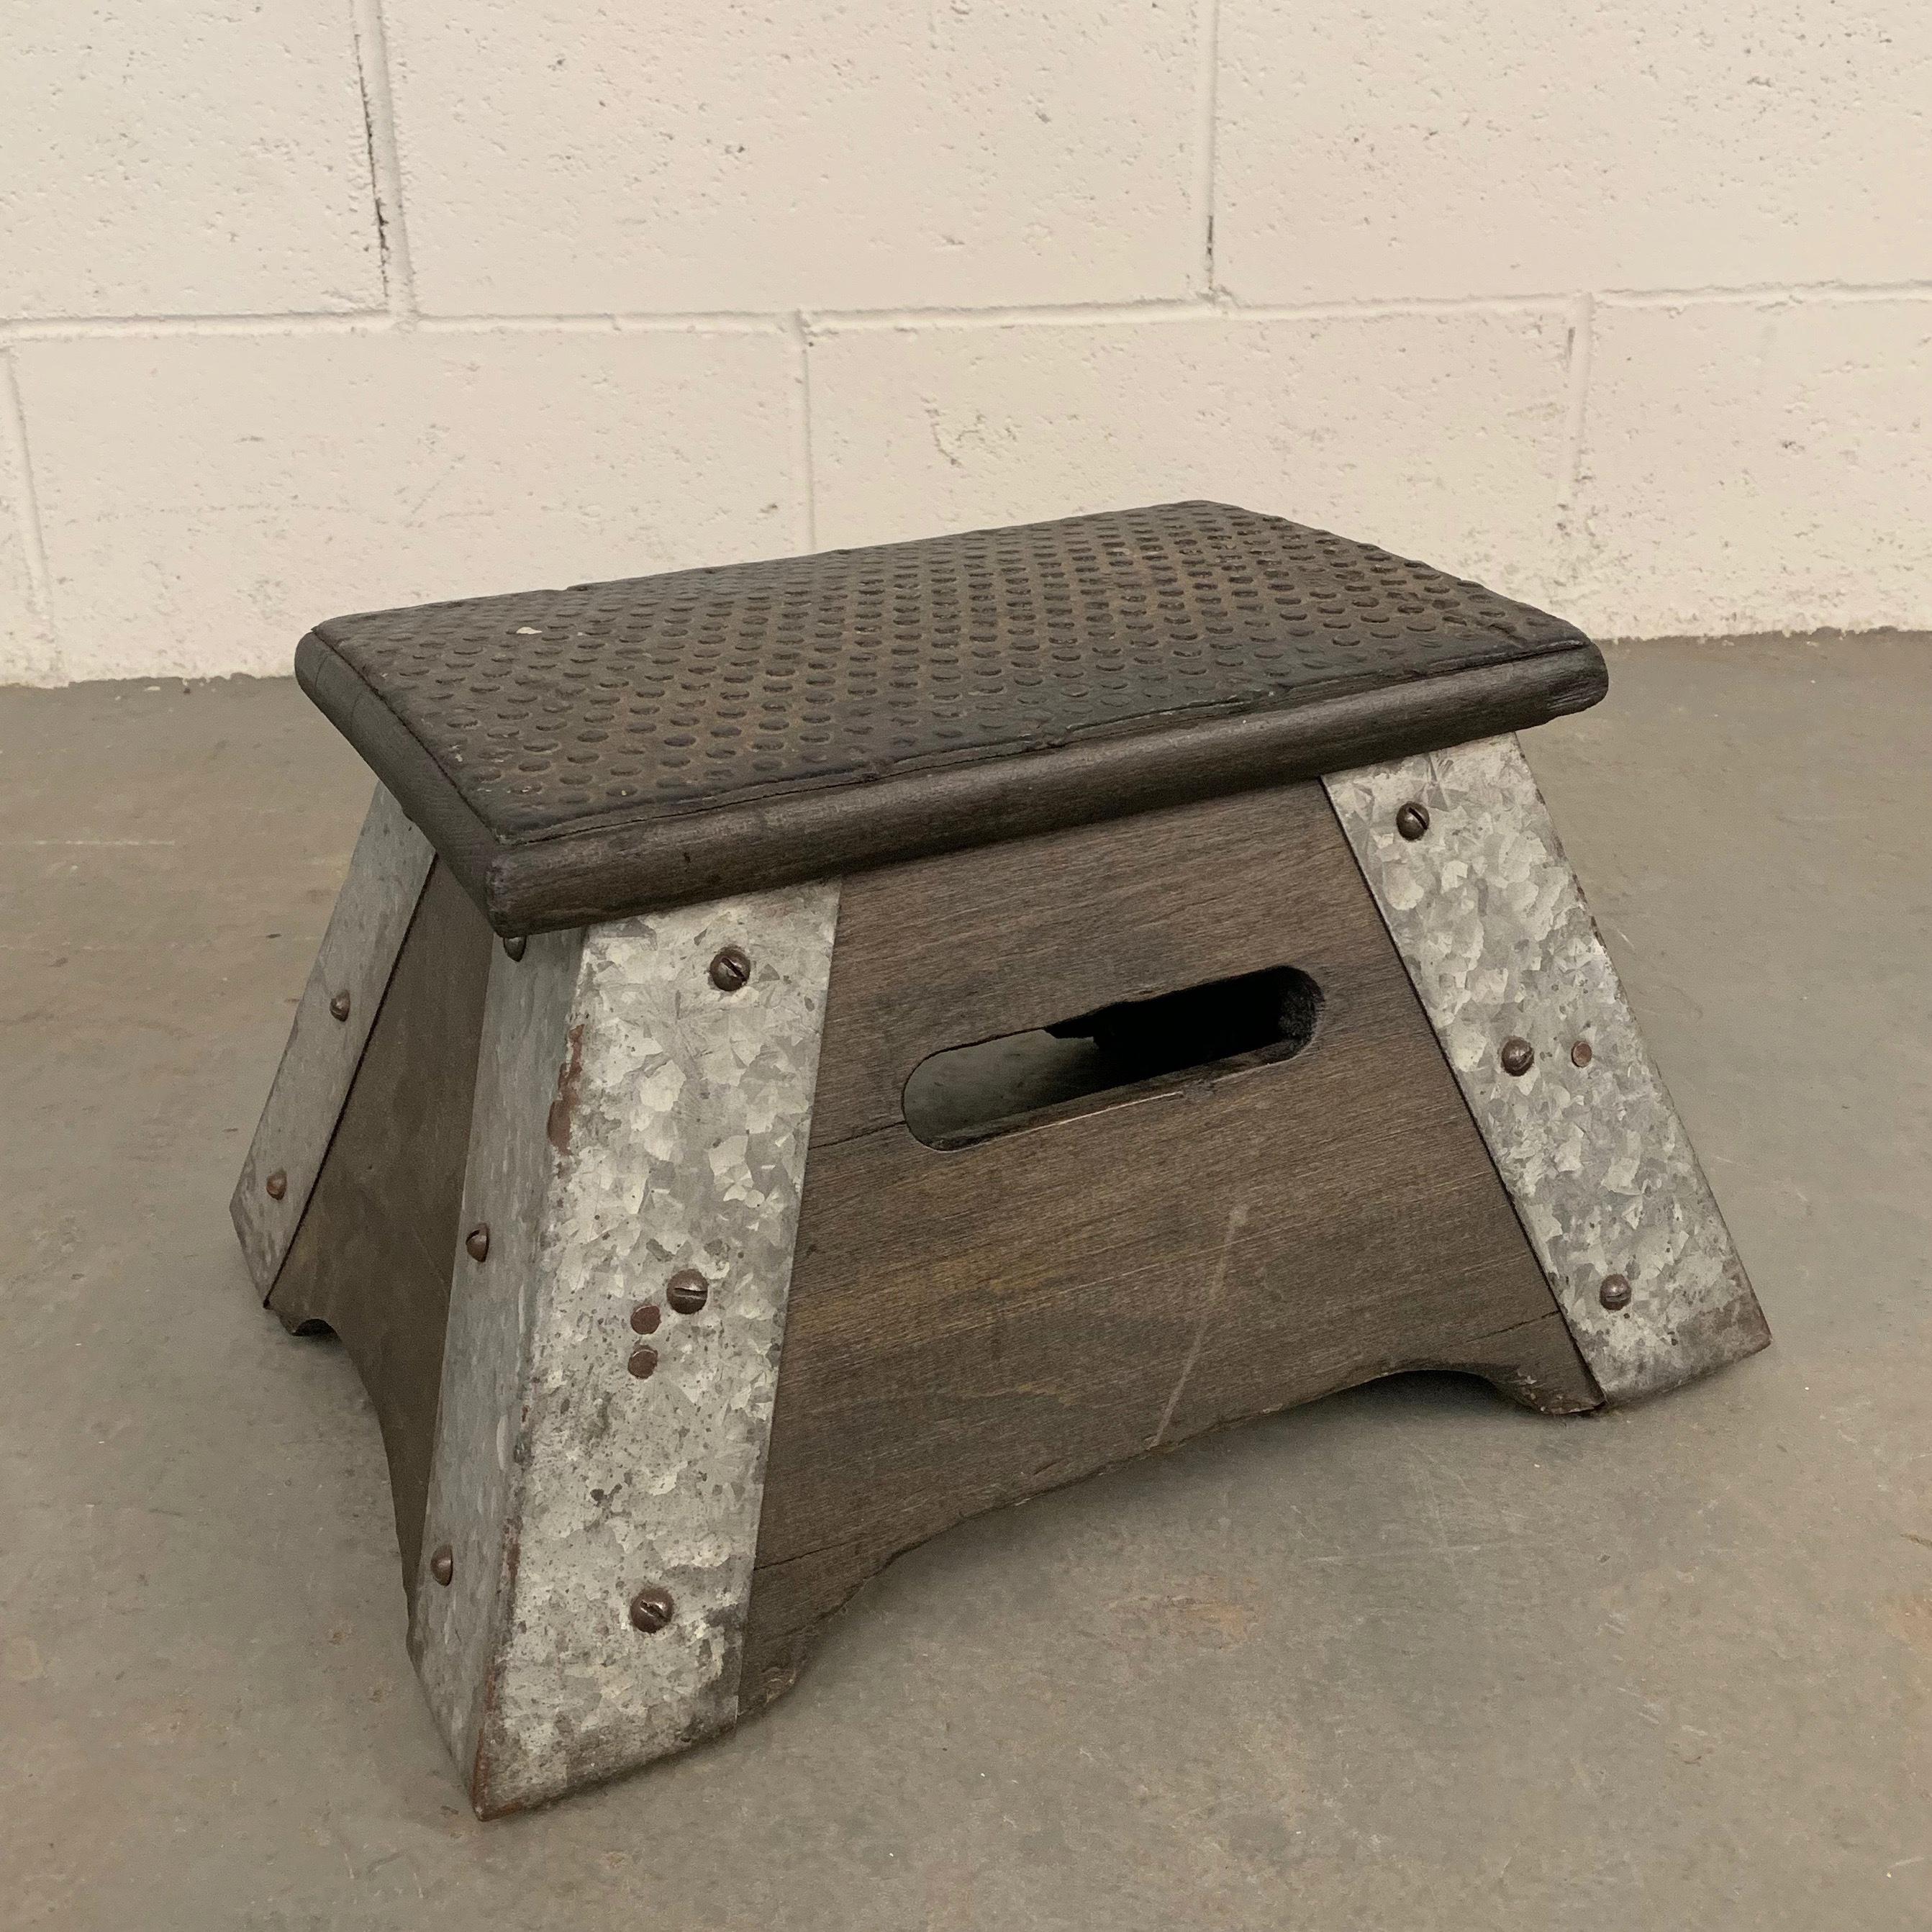 Industrial, train conductor, step stool features an ebonized maple base with galvanized steel edges and rubber grip top that is 12 x 8 inches.